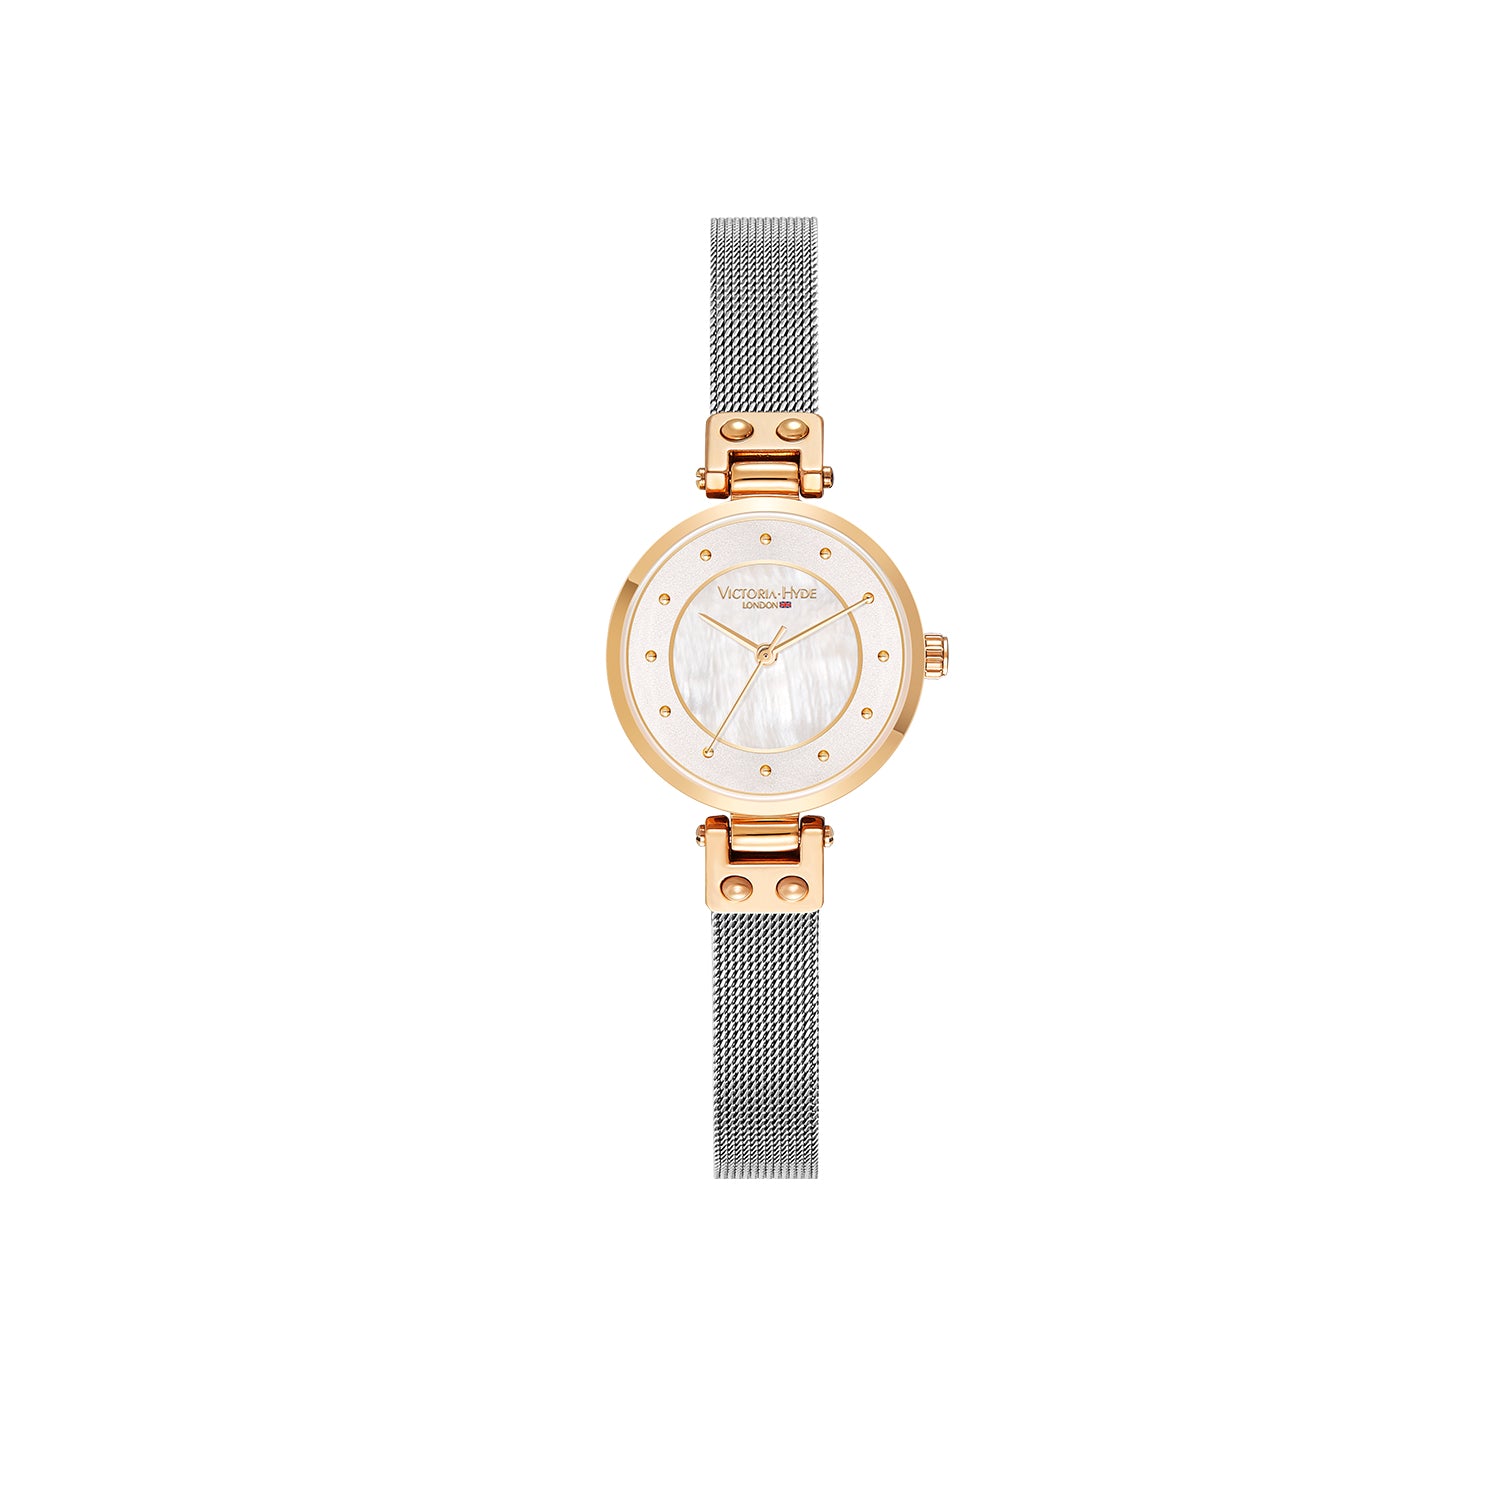 Watch Princess Charlotte in Silver-Rosegold